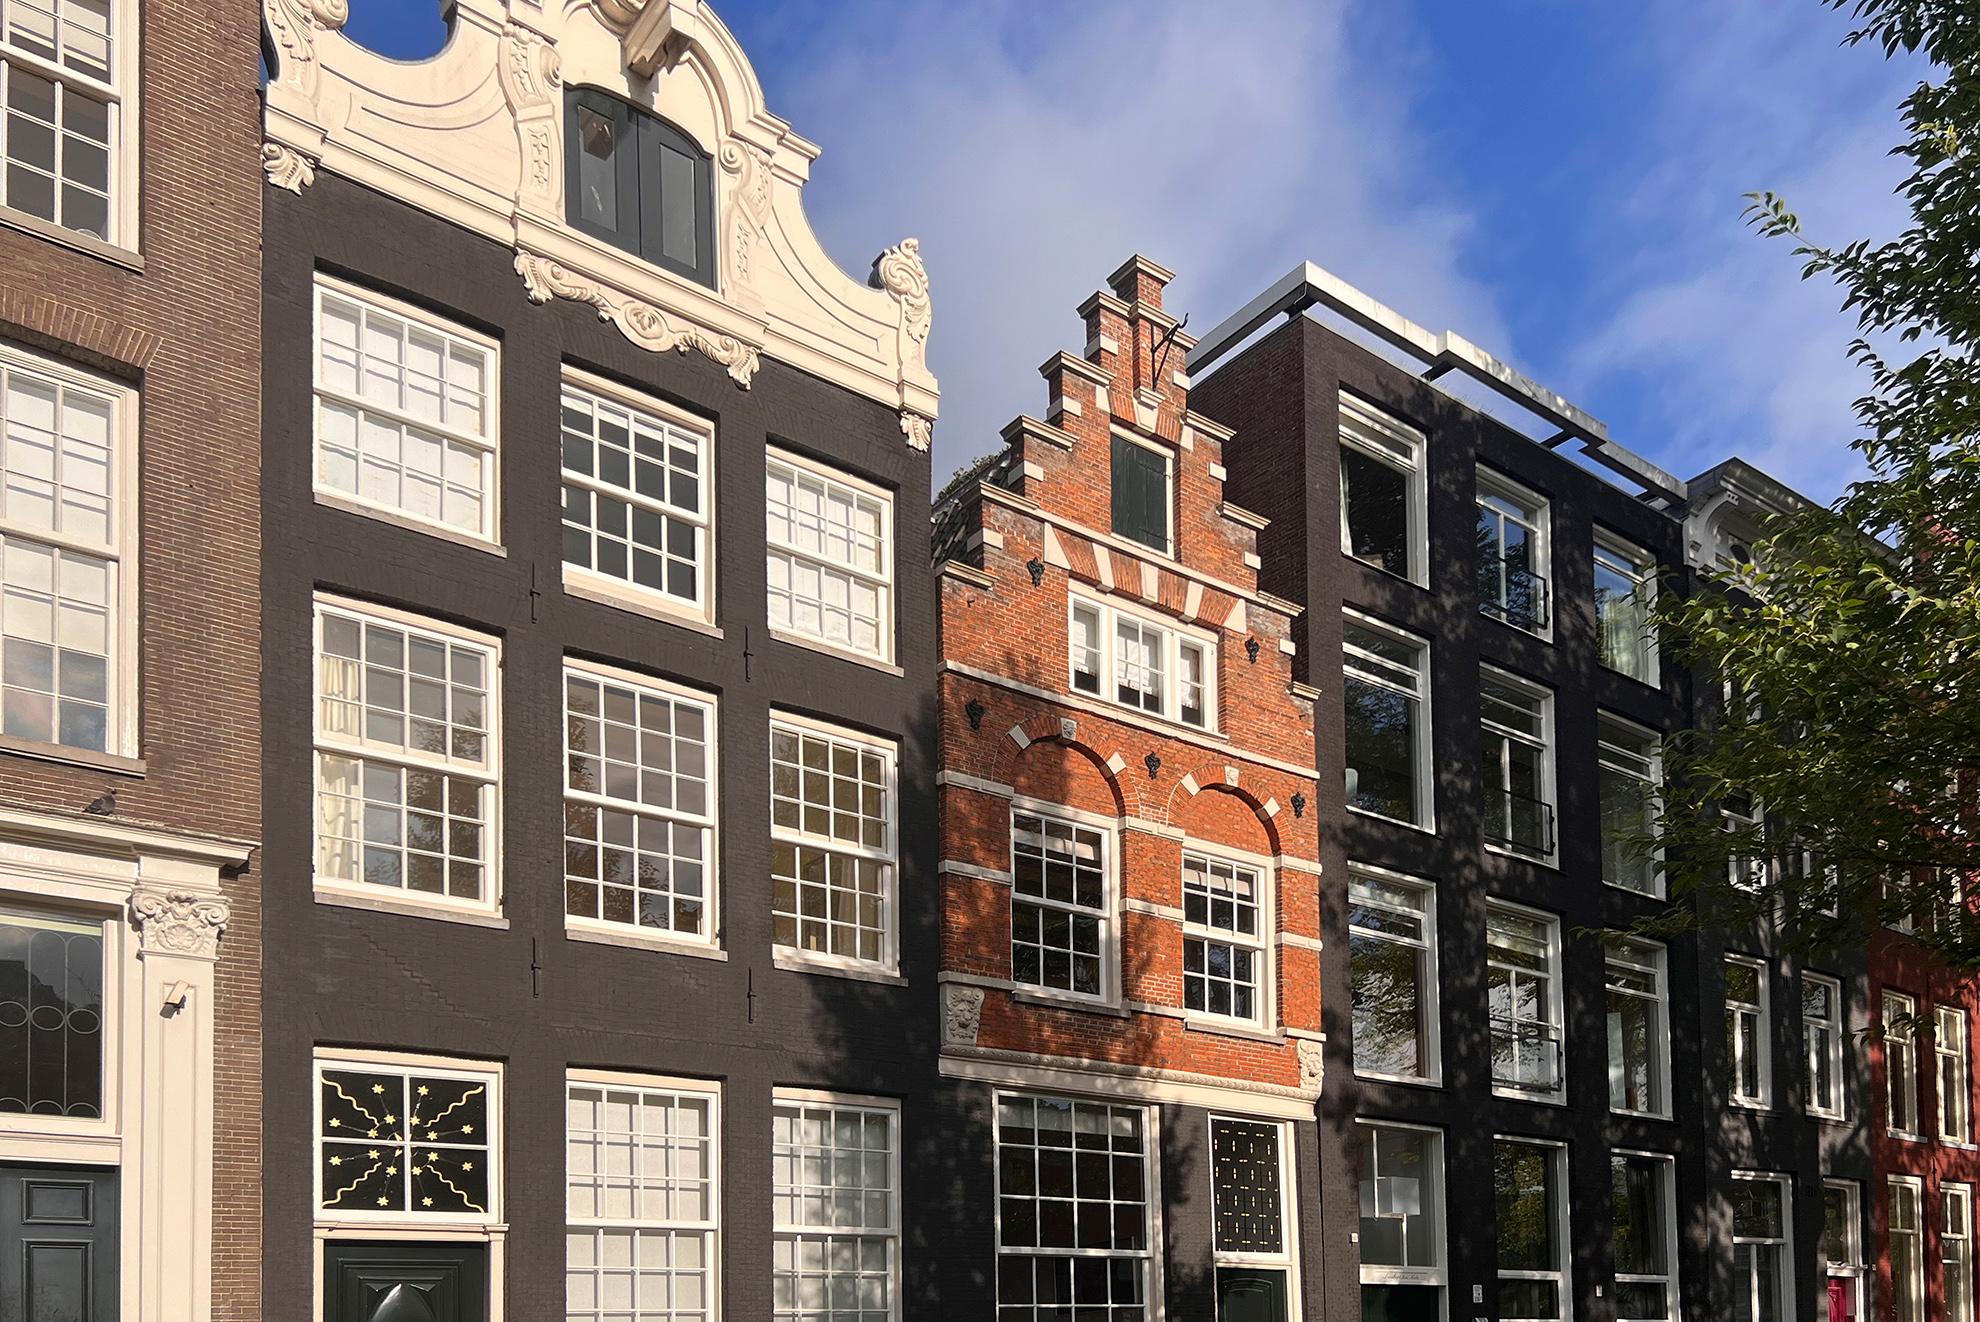 Featured image for “Herengracht 334 A & PP in Romeinsarmsteeg – LIVING IN FIVE CENTURIES”